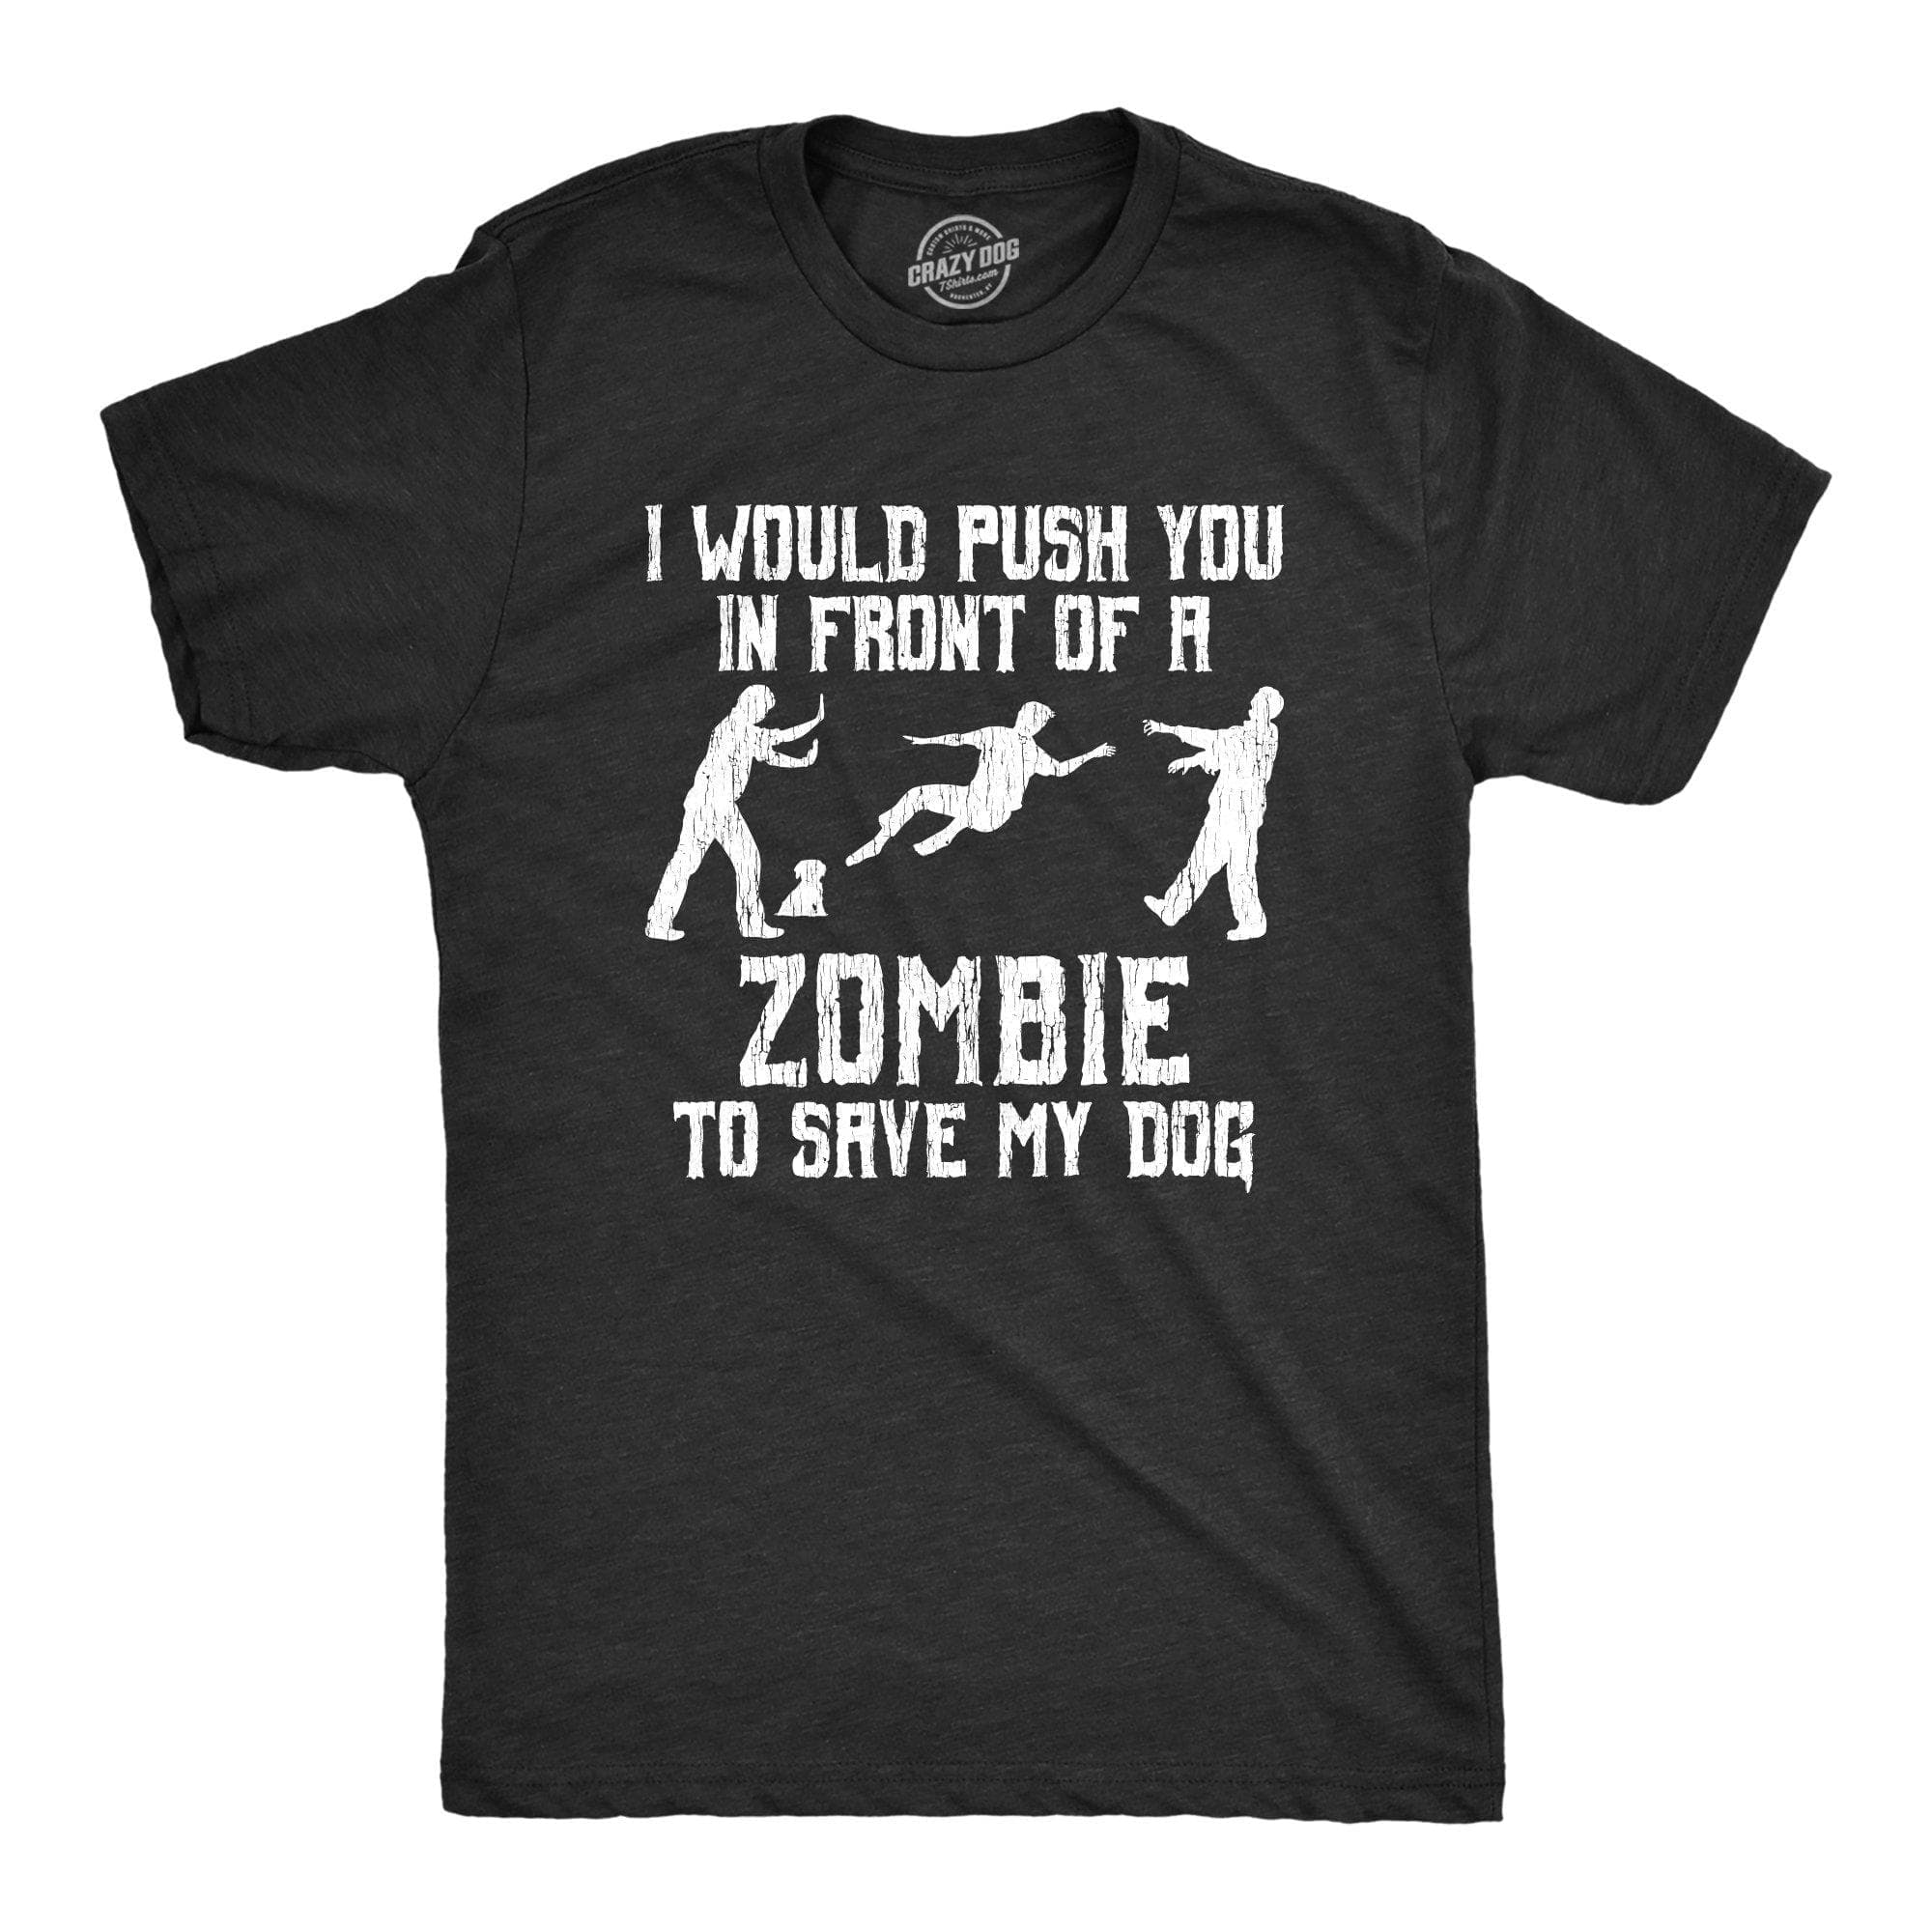 I Would Push You In Front Of A Zombie To Save My Dog Men's Tshirt - Crazy Dog T-Shirts